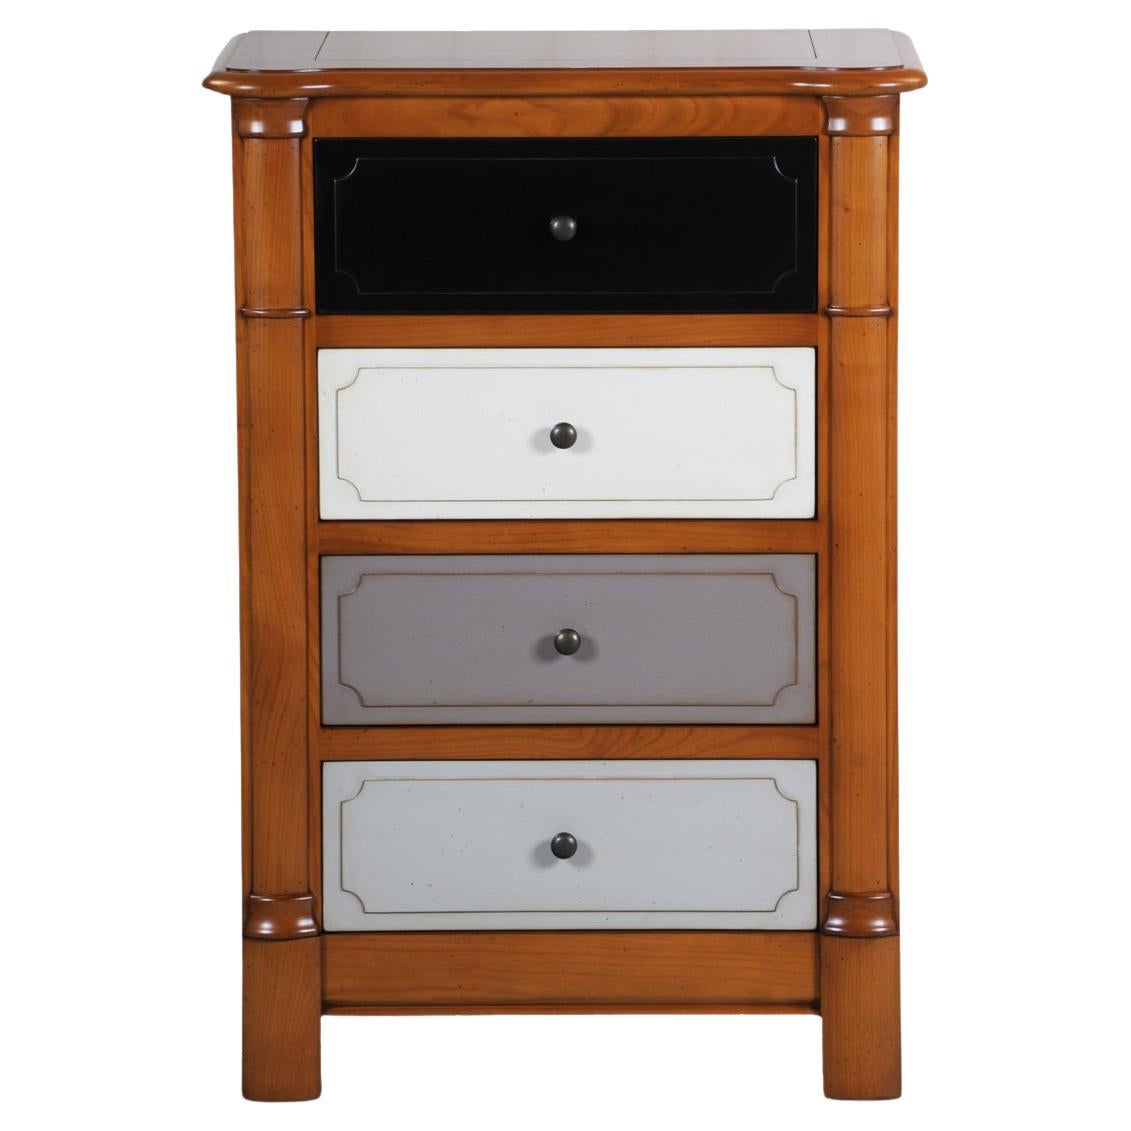 4-lacquered drawer French Chiffonier in solid cherry wood